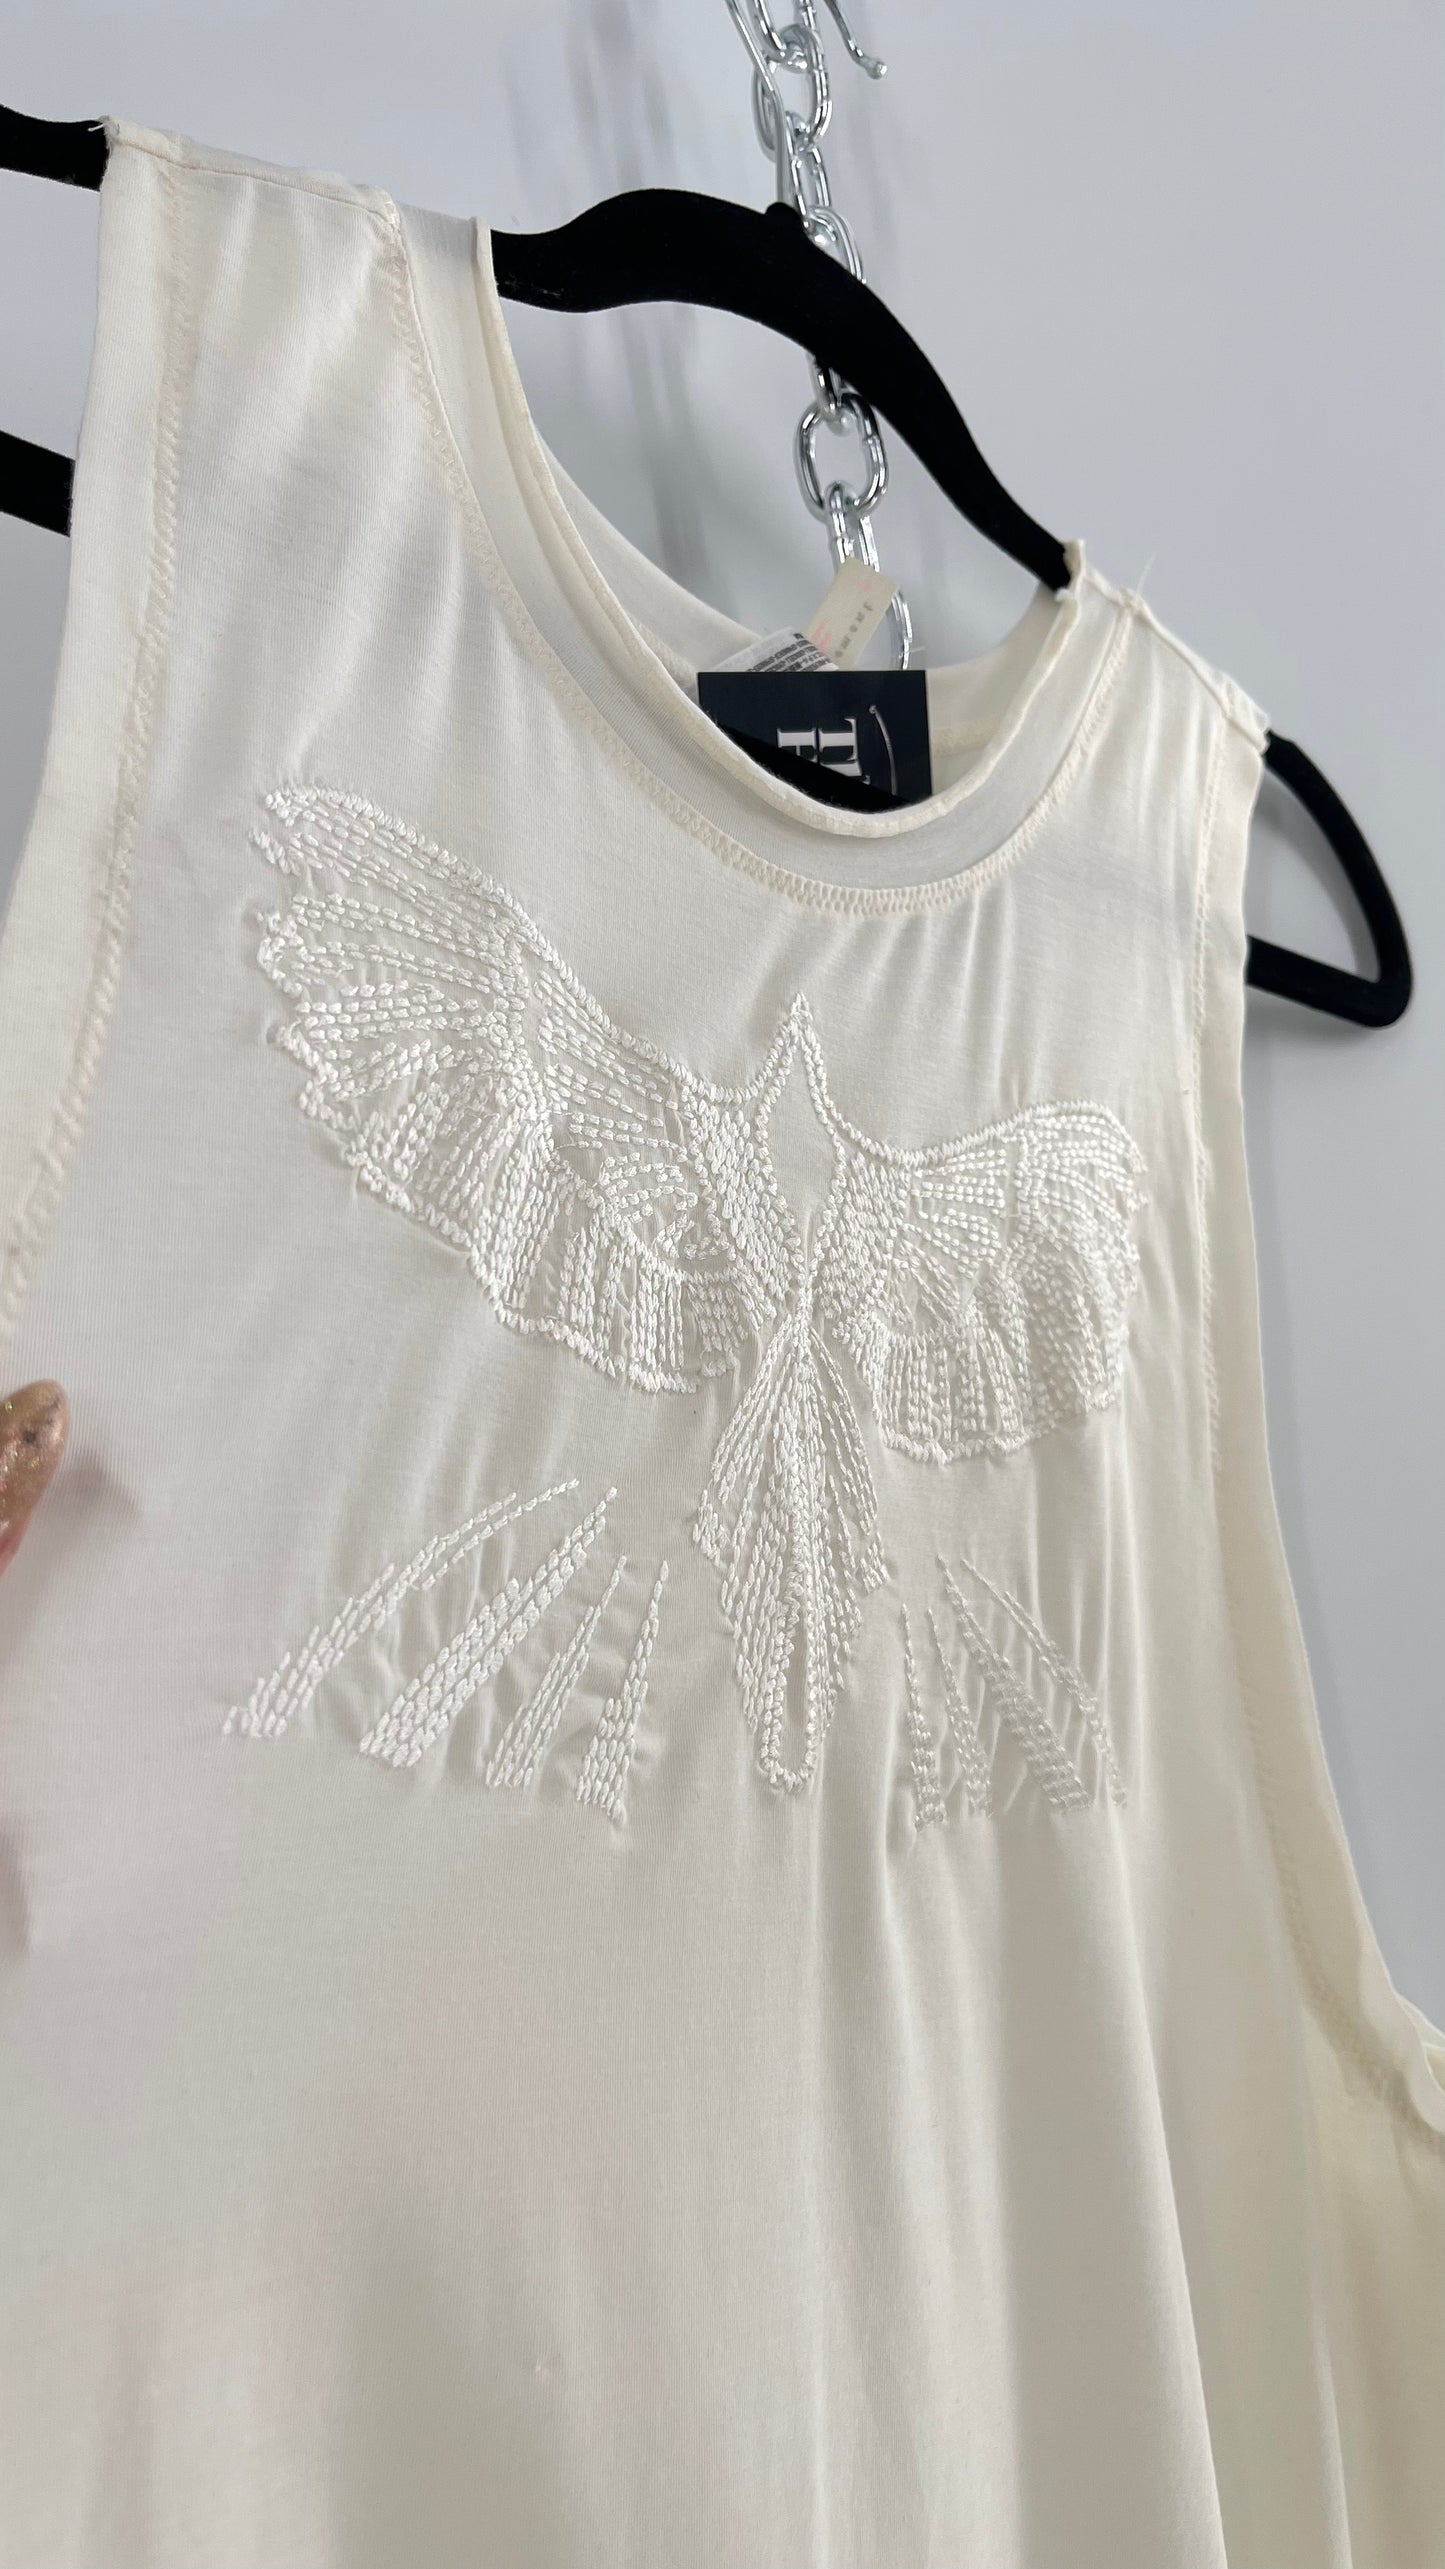 Free People Embroidered Pheonix Tank (Small)